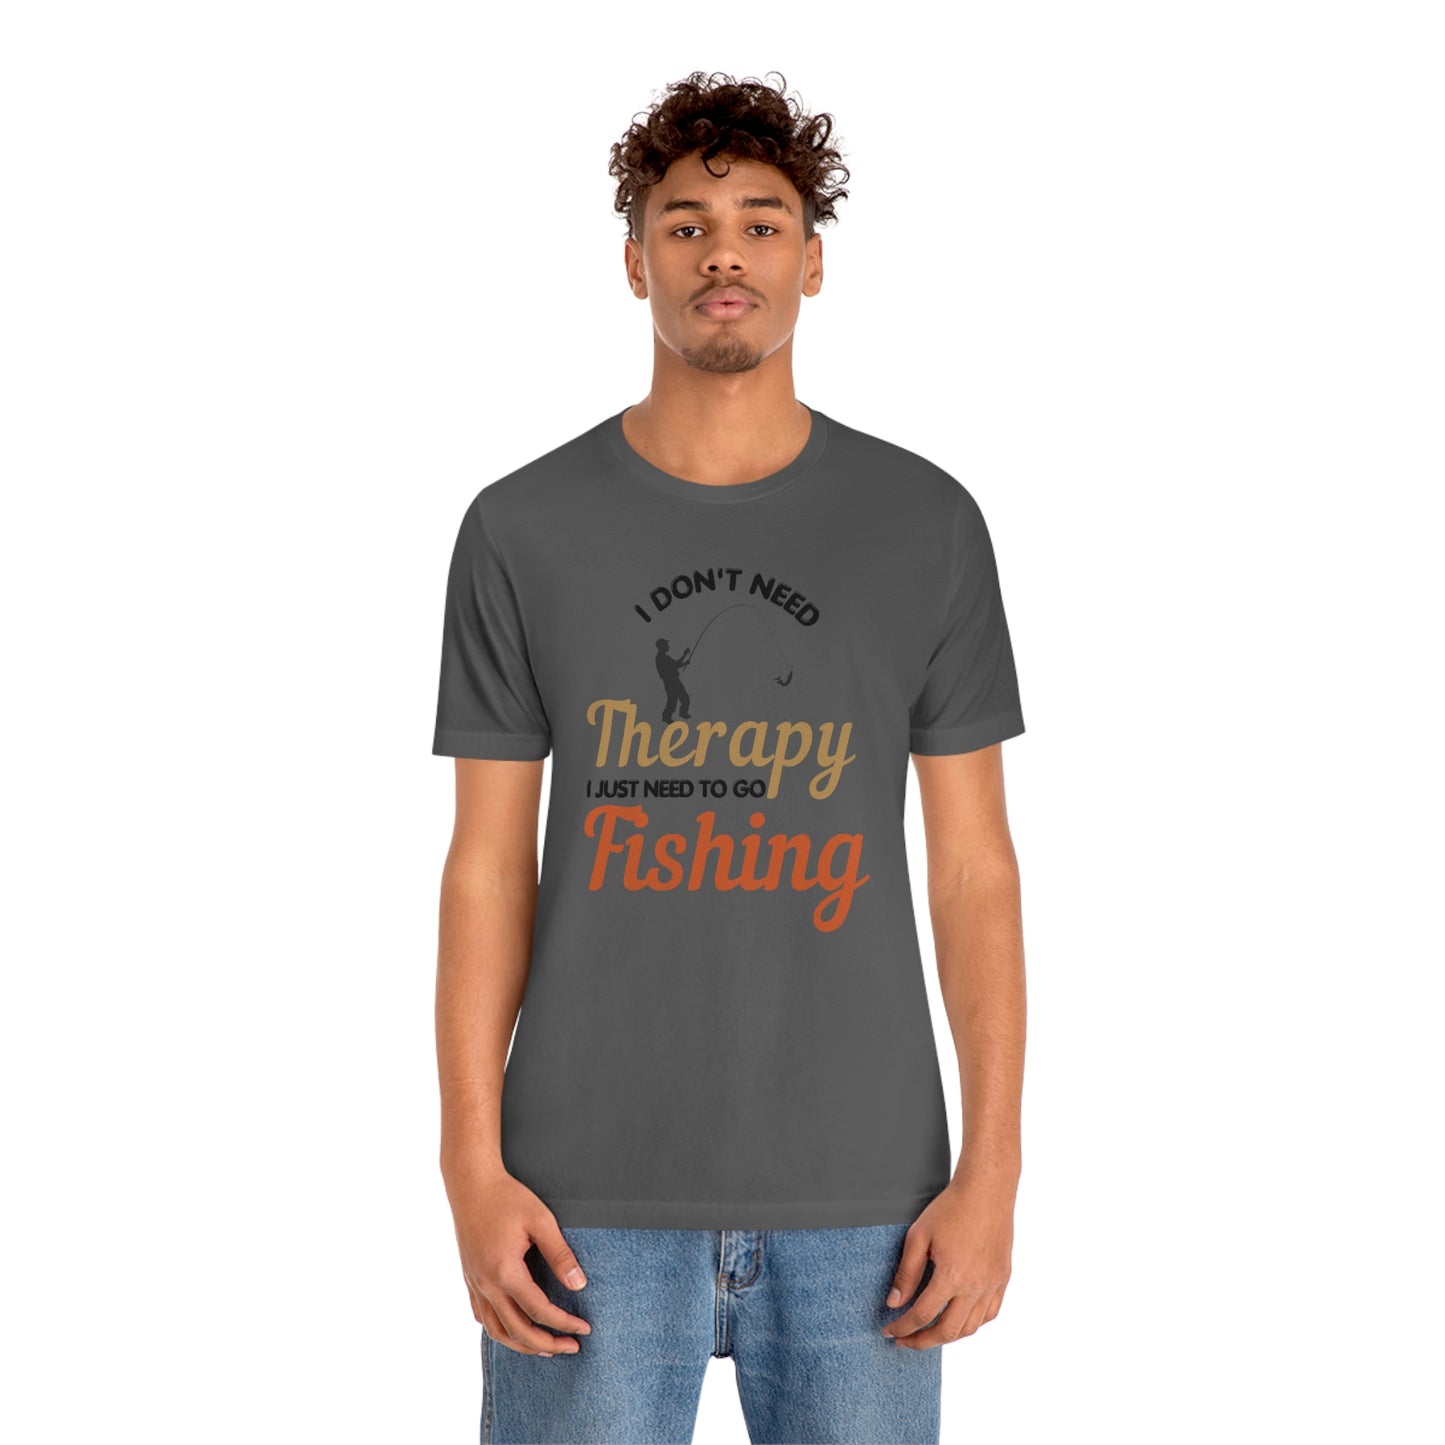 I don't need therapy I just need to go Fishing shirt, fishing shirt, dad shirt, father's day shirt, gift for Dad